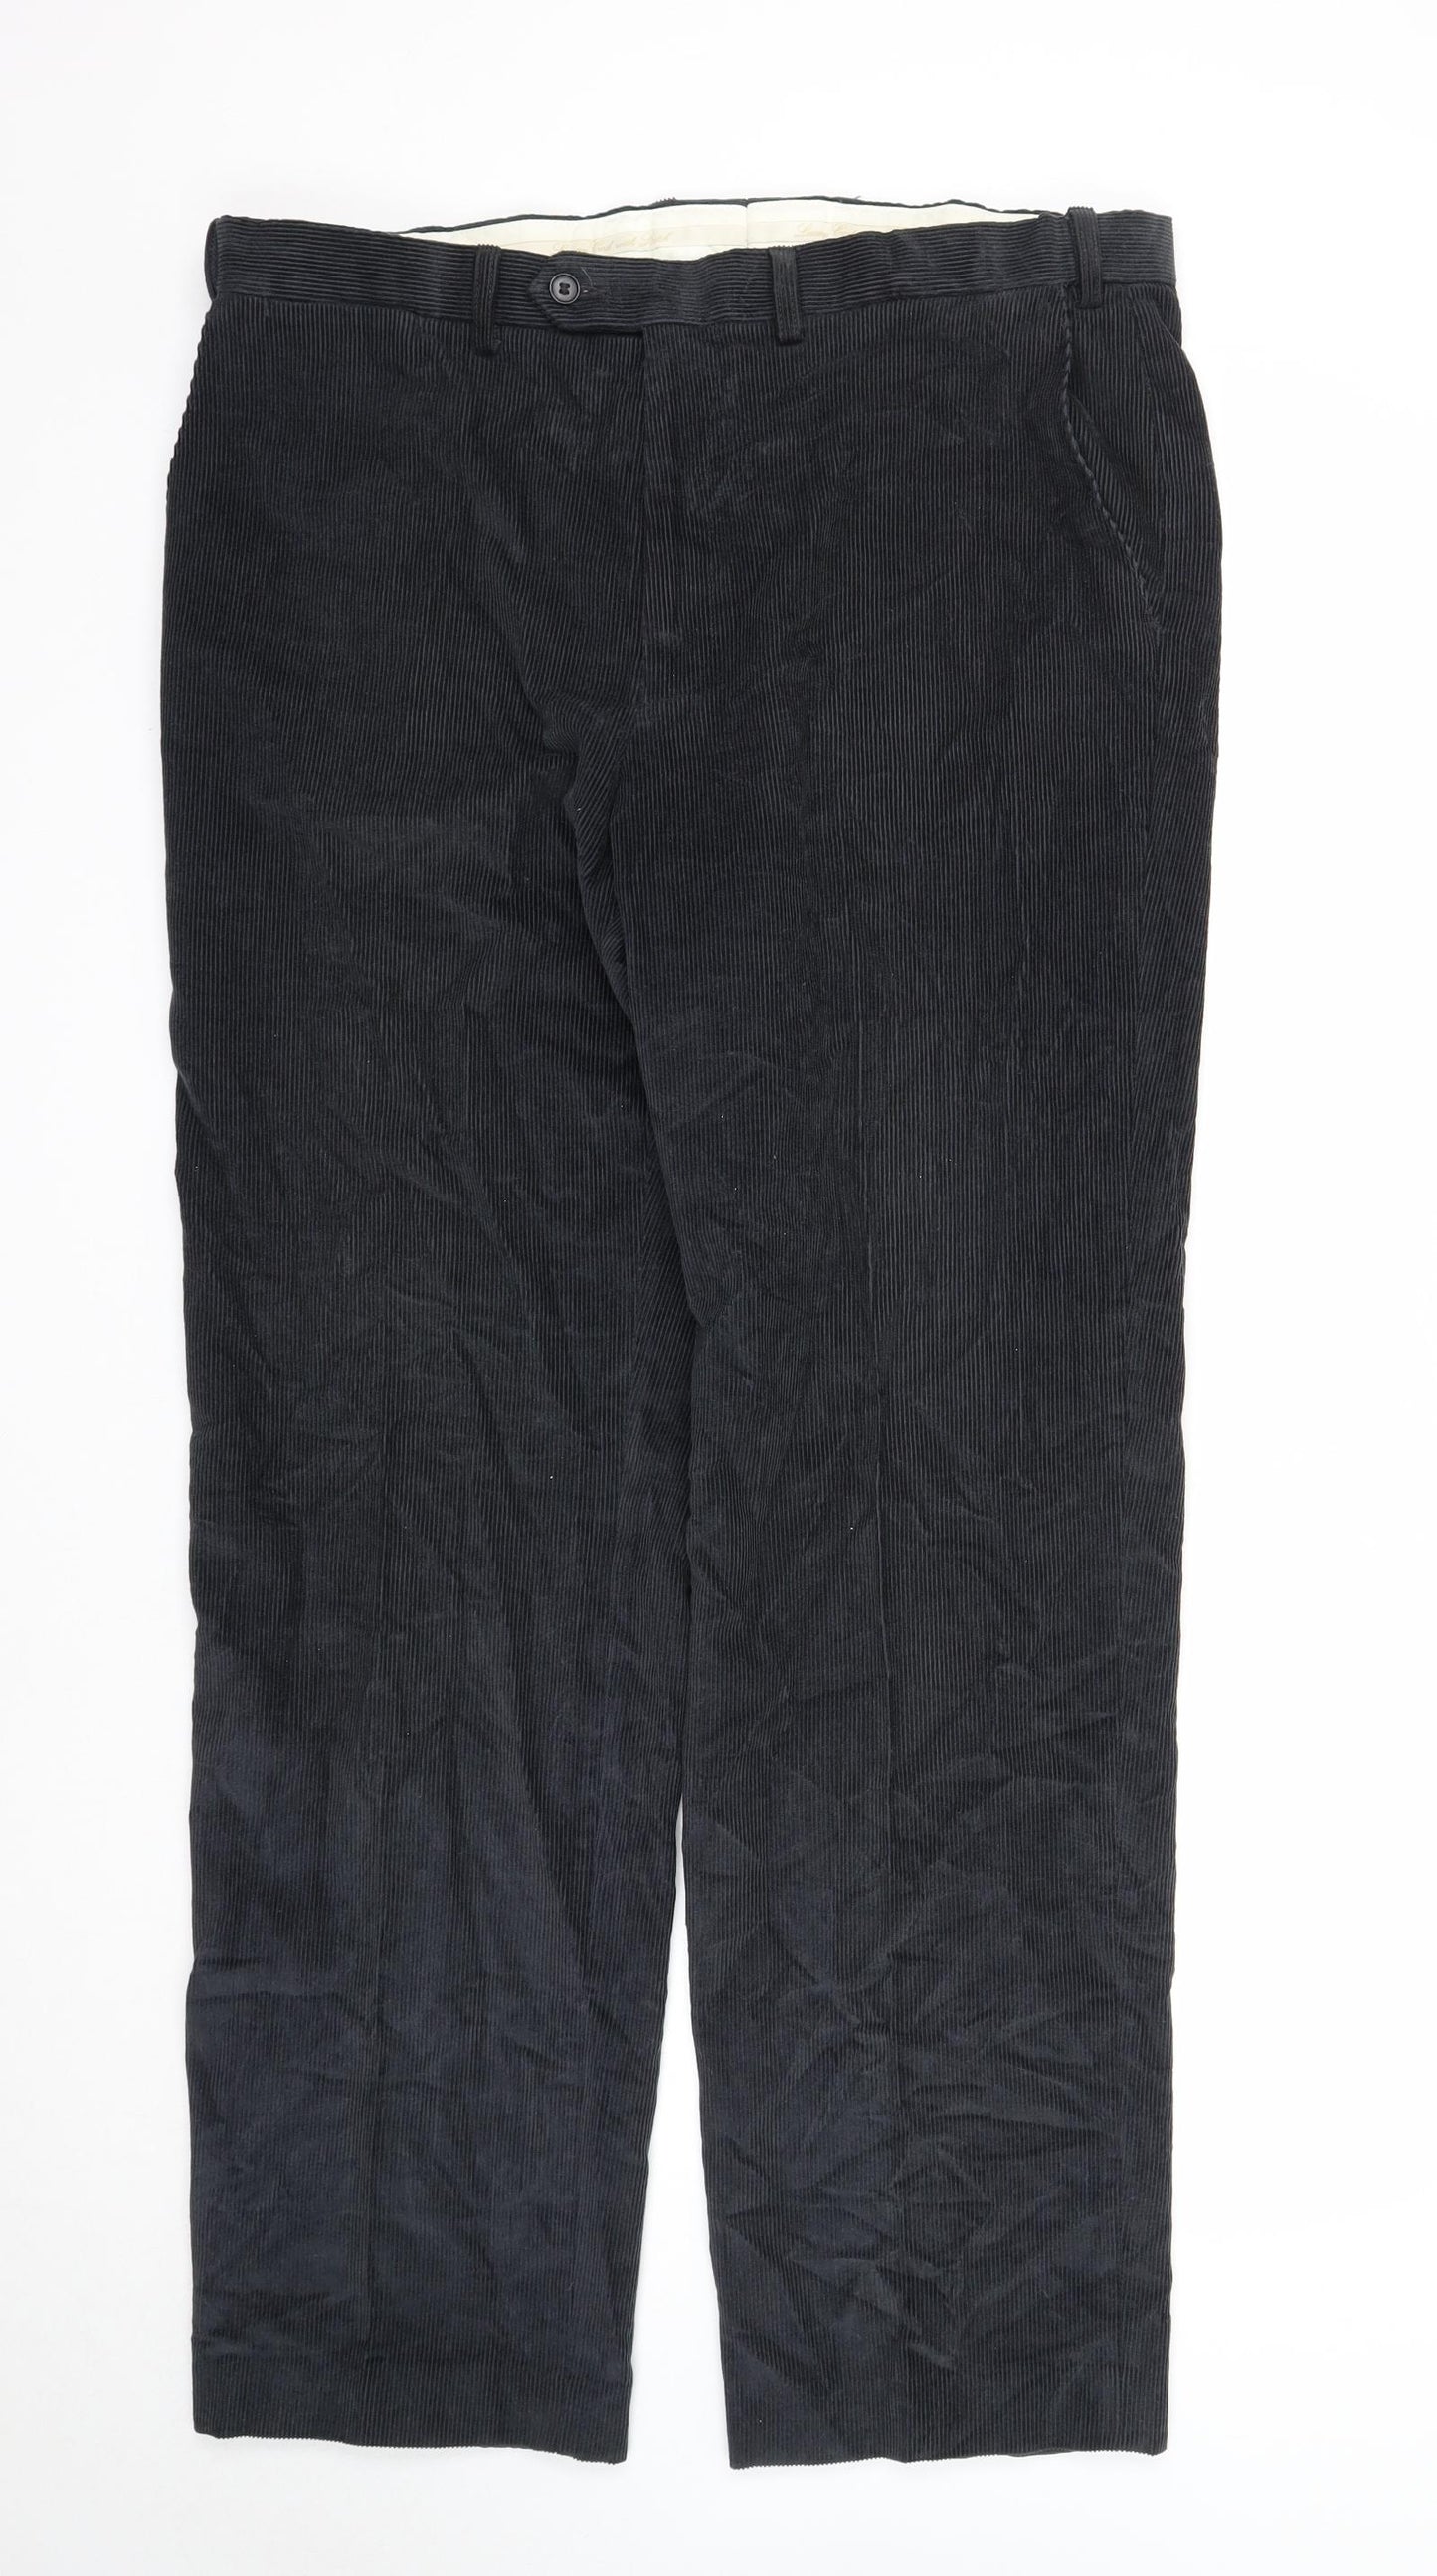 Marks and Spencer Mens Grey Cotton Trousers Size 38 in L33 in Regular Zip